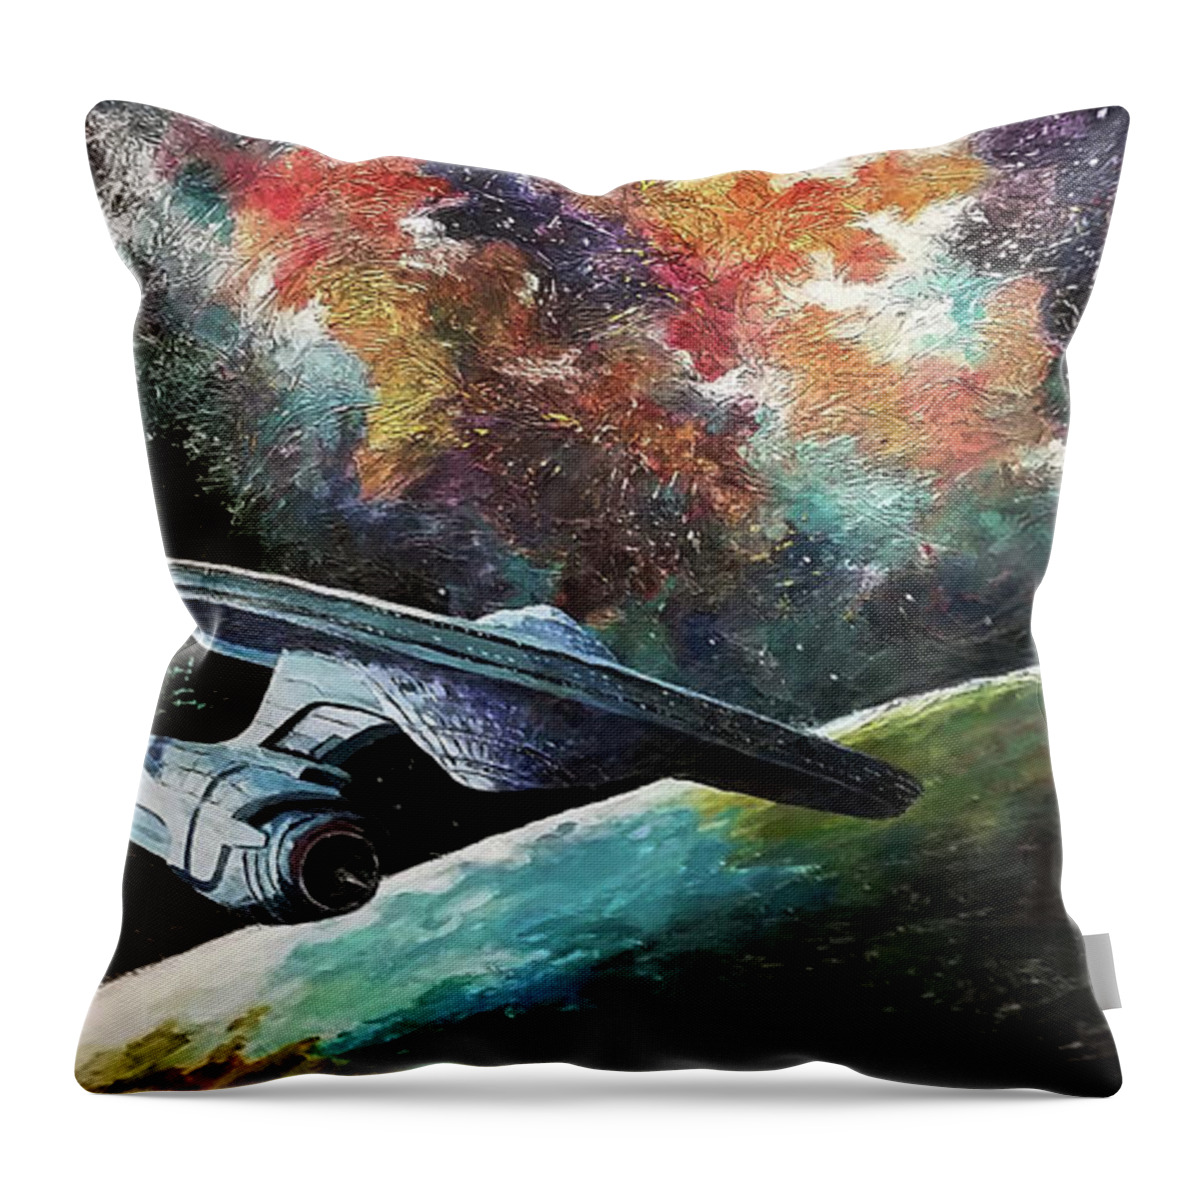 Star Trek Throw Pillow featuring the painting To go beyond by David Maynard